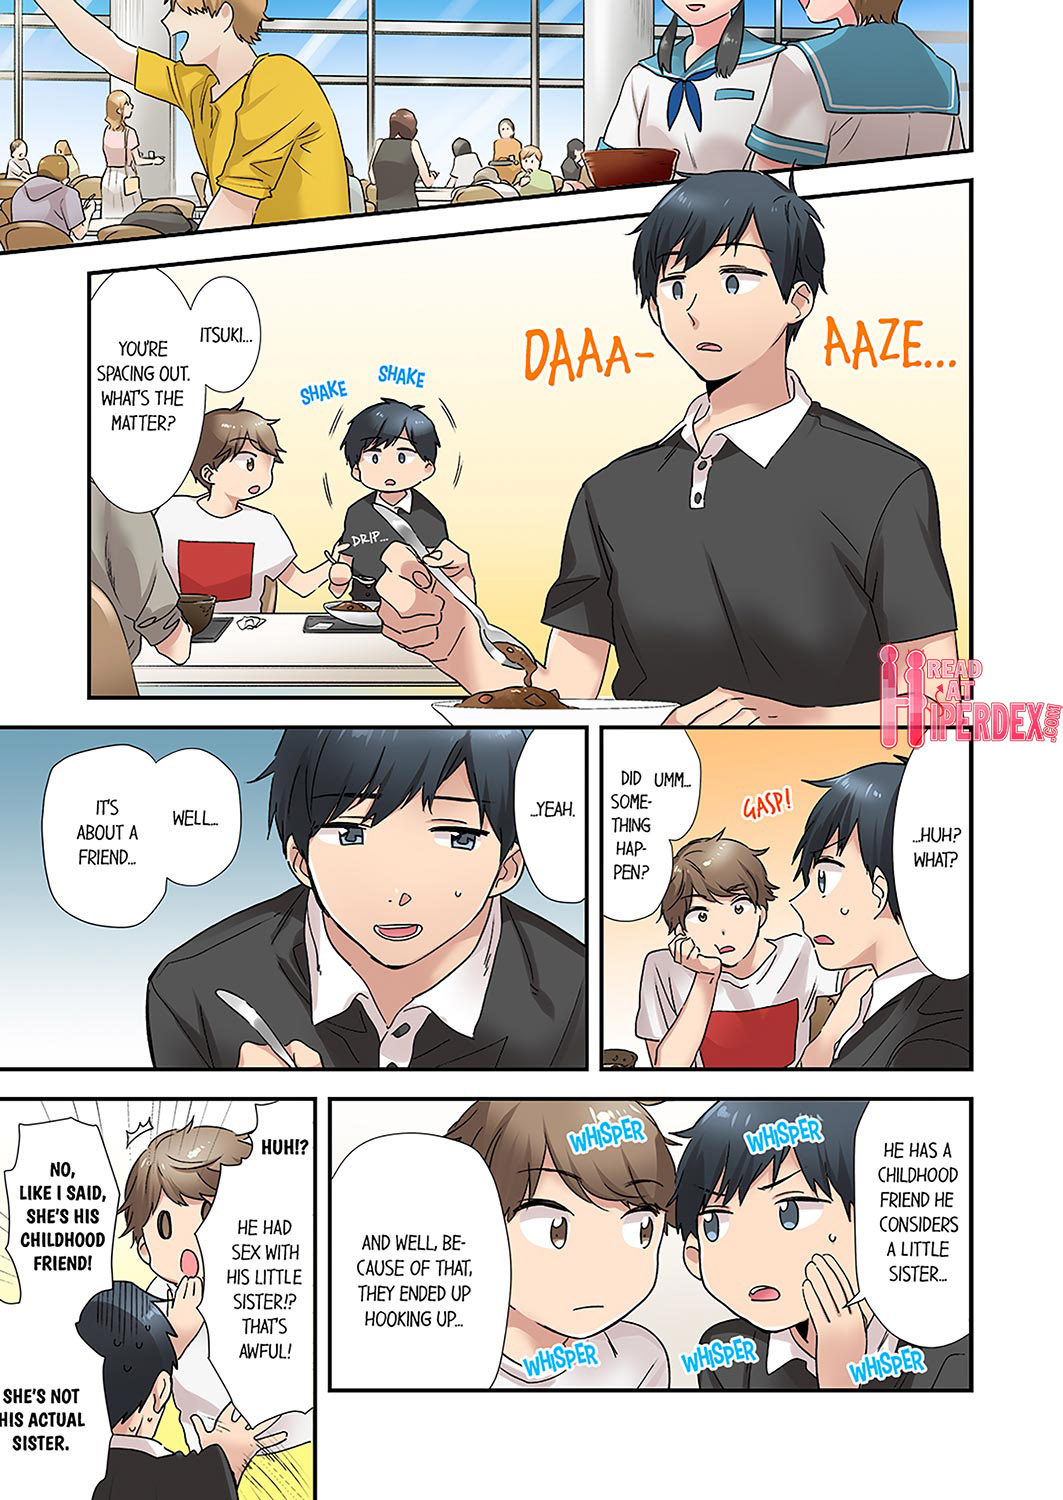 A Scorching Hot Day with A Broken Air Conditioner. If I Keep Having Sex with My Sweaty Childhood Friend… - Chapter 7 Page 1